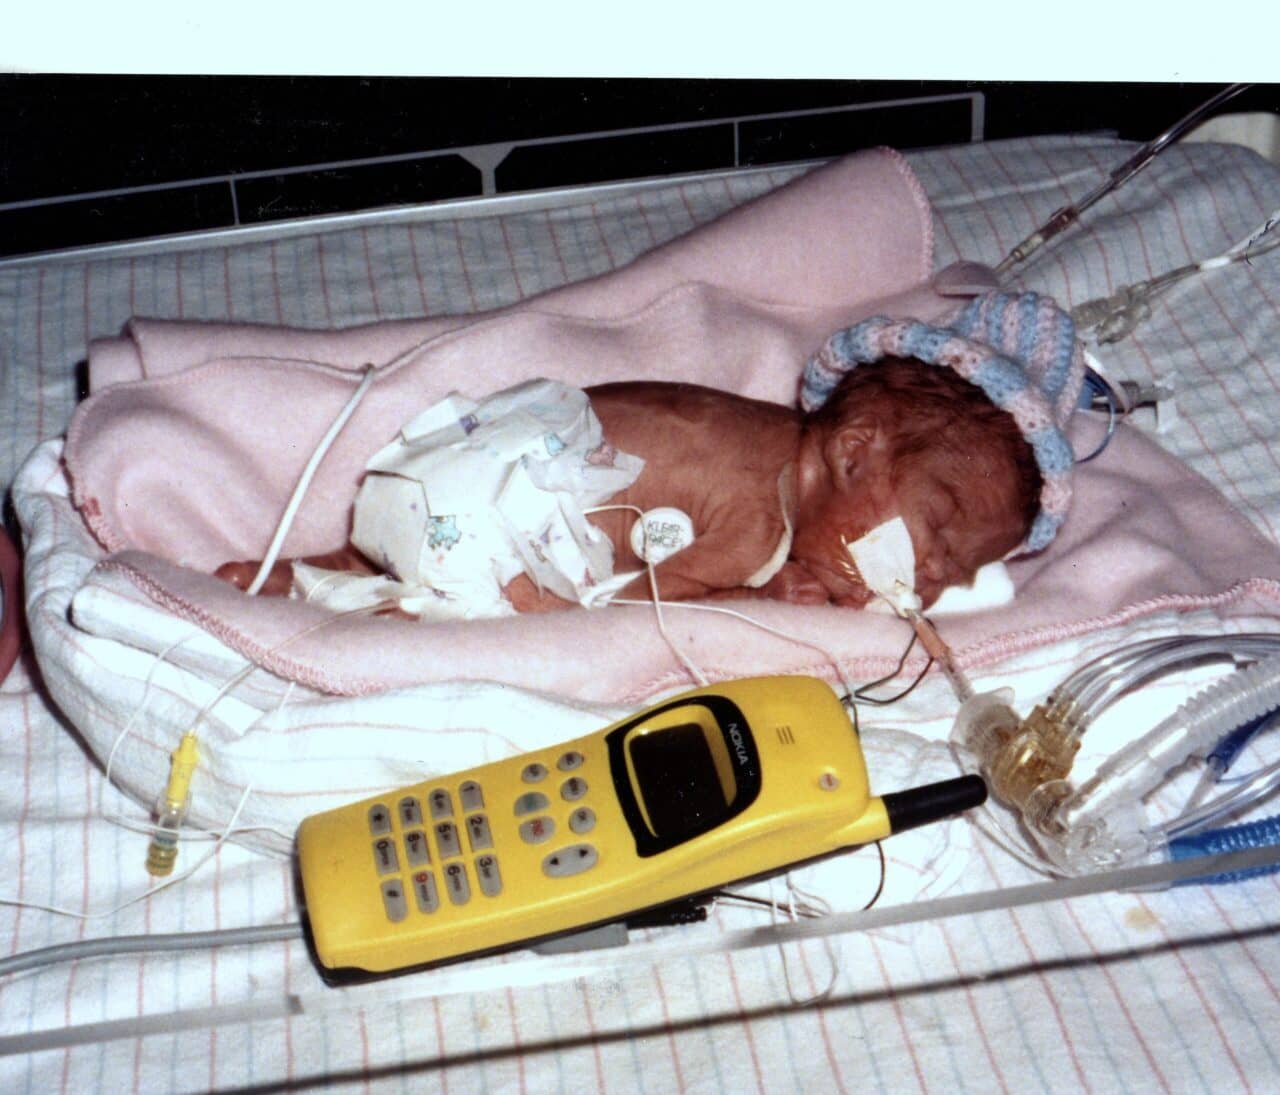 Image: Louisa, micro-preemie, lying next to a cell phone at about the same size